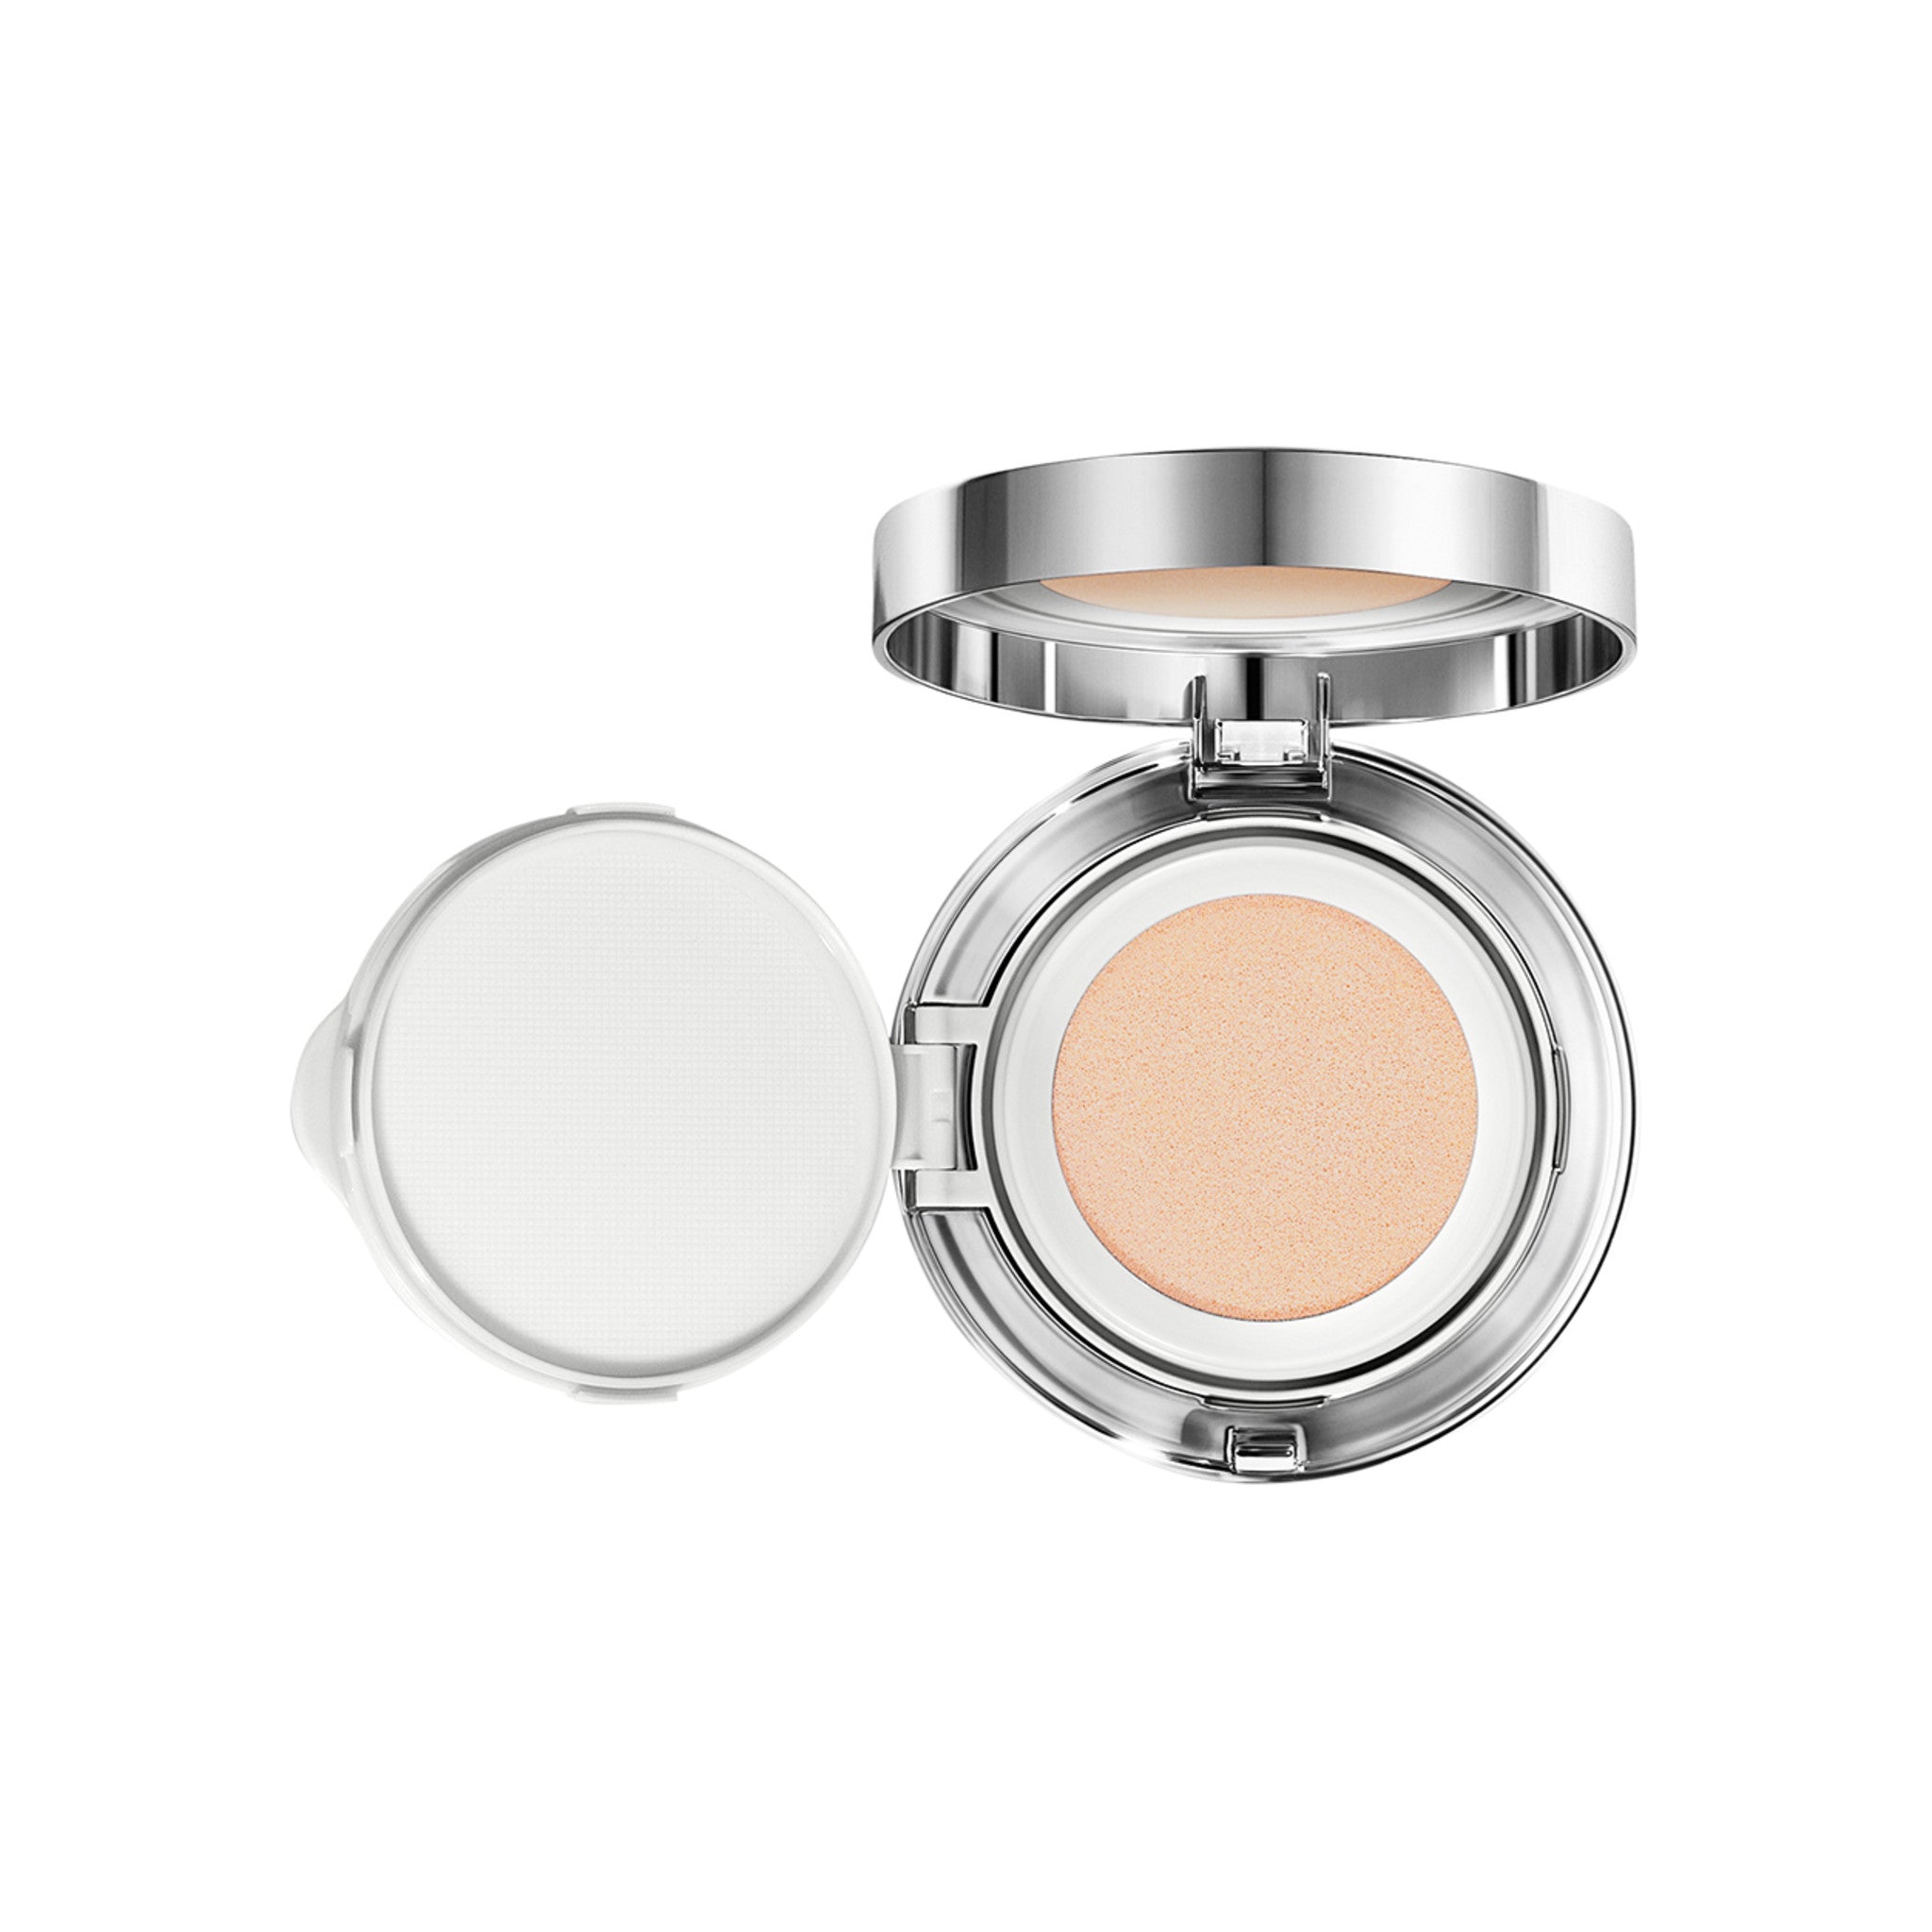 Chantecaille Future Skin Cushion Skincare Foundation Color/Shade variant: Aura main image. This product is for light cool neutral pink complexions